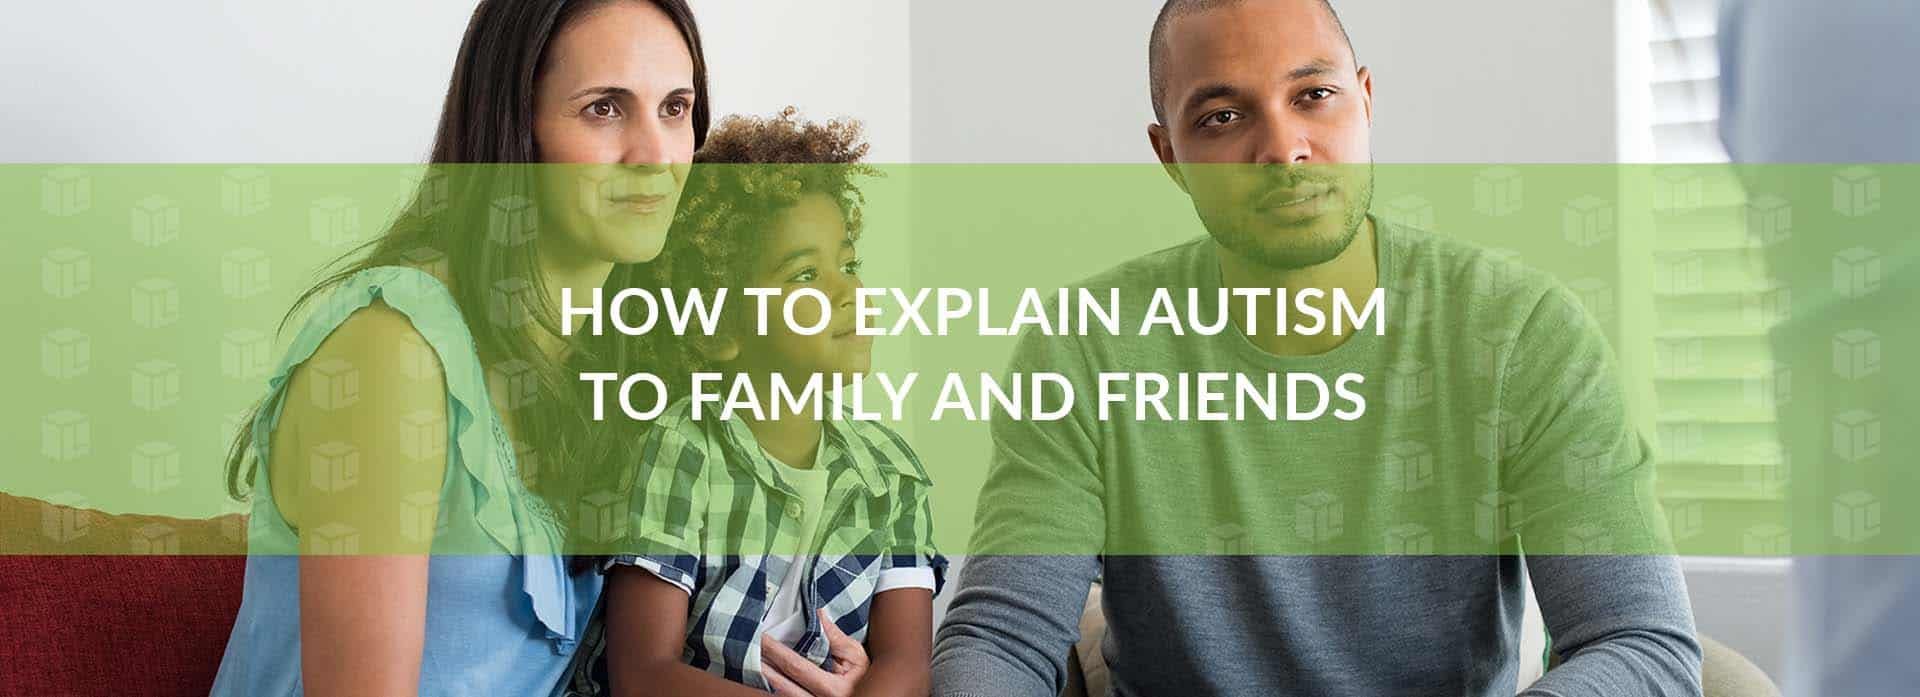 How To Explain Autism To Family And Friends How To Explain Autism To Family And Friends How To Explain Autism To Family And Friends How To Explain Autism To Family And Friends